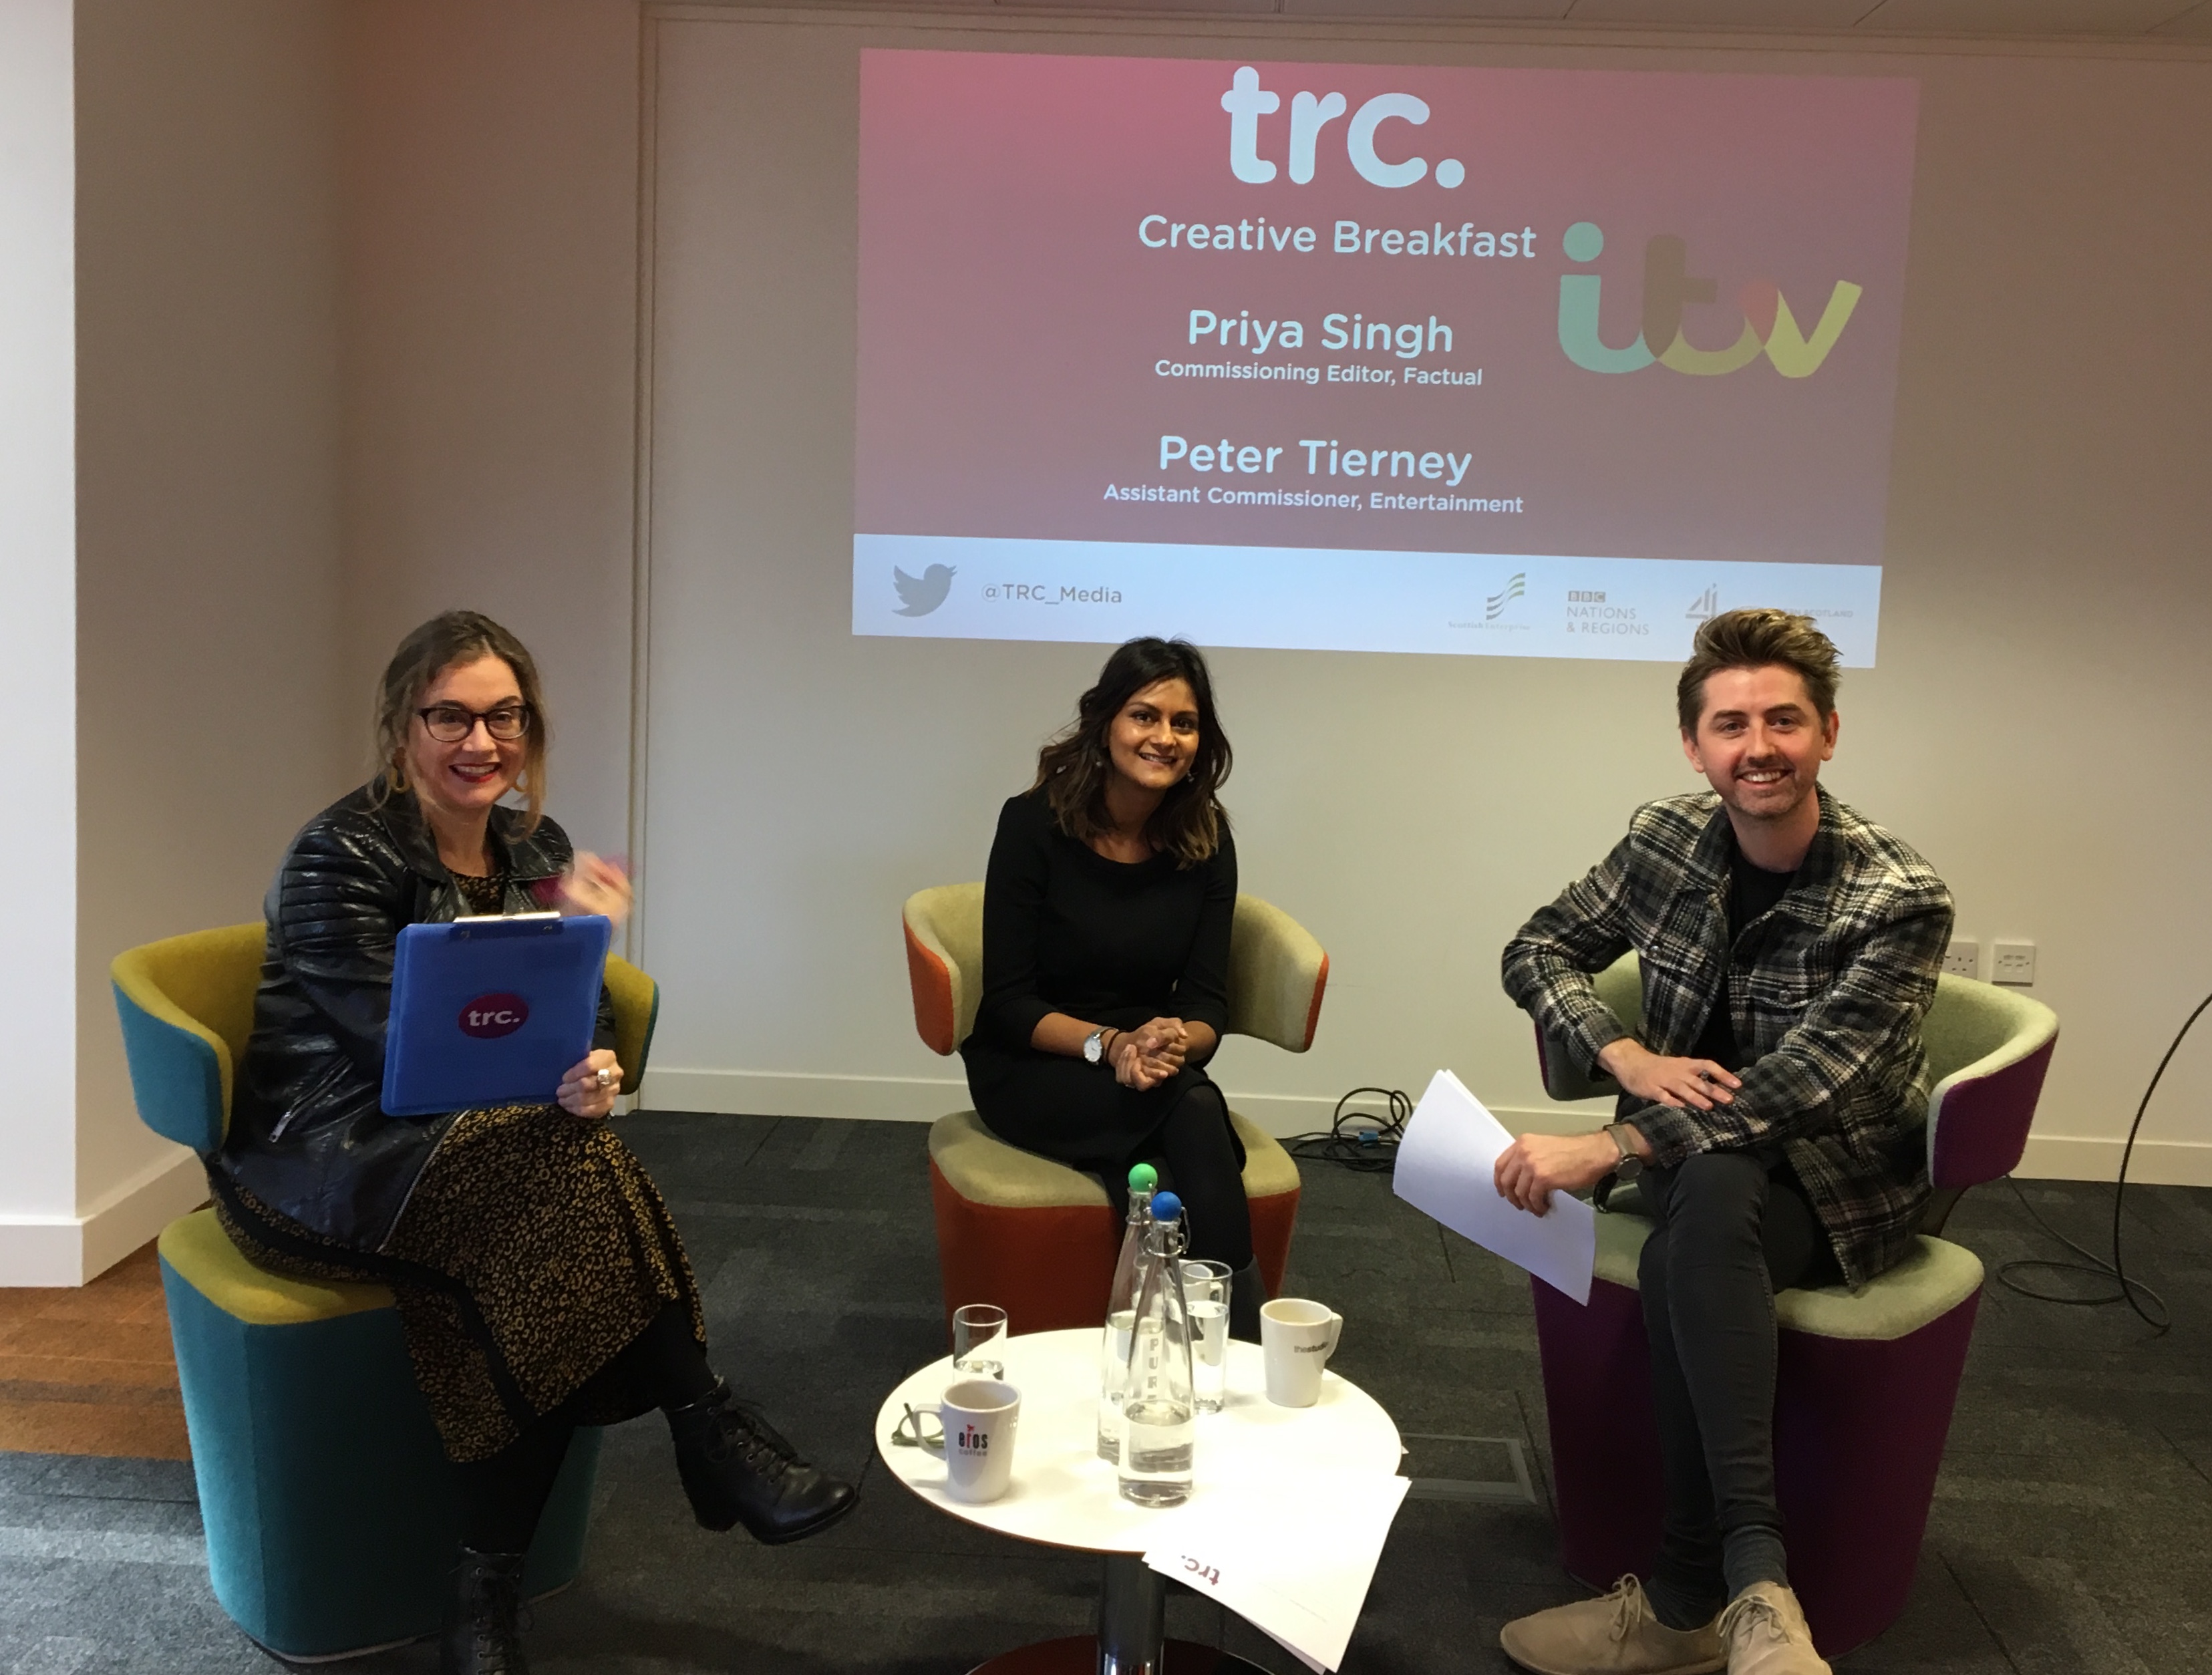 Claire Scally, Priya Singh  and Peter Tierney smiling at the camera.